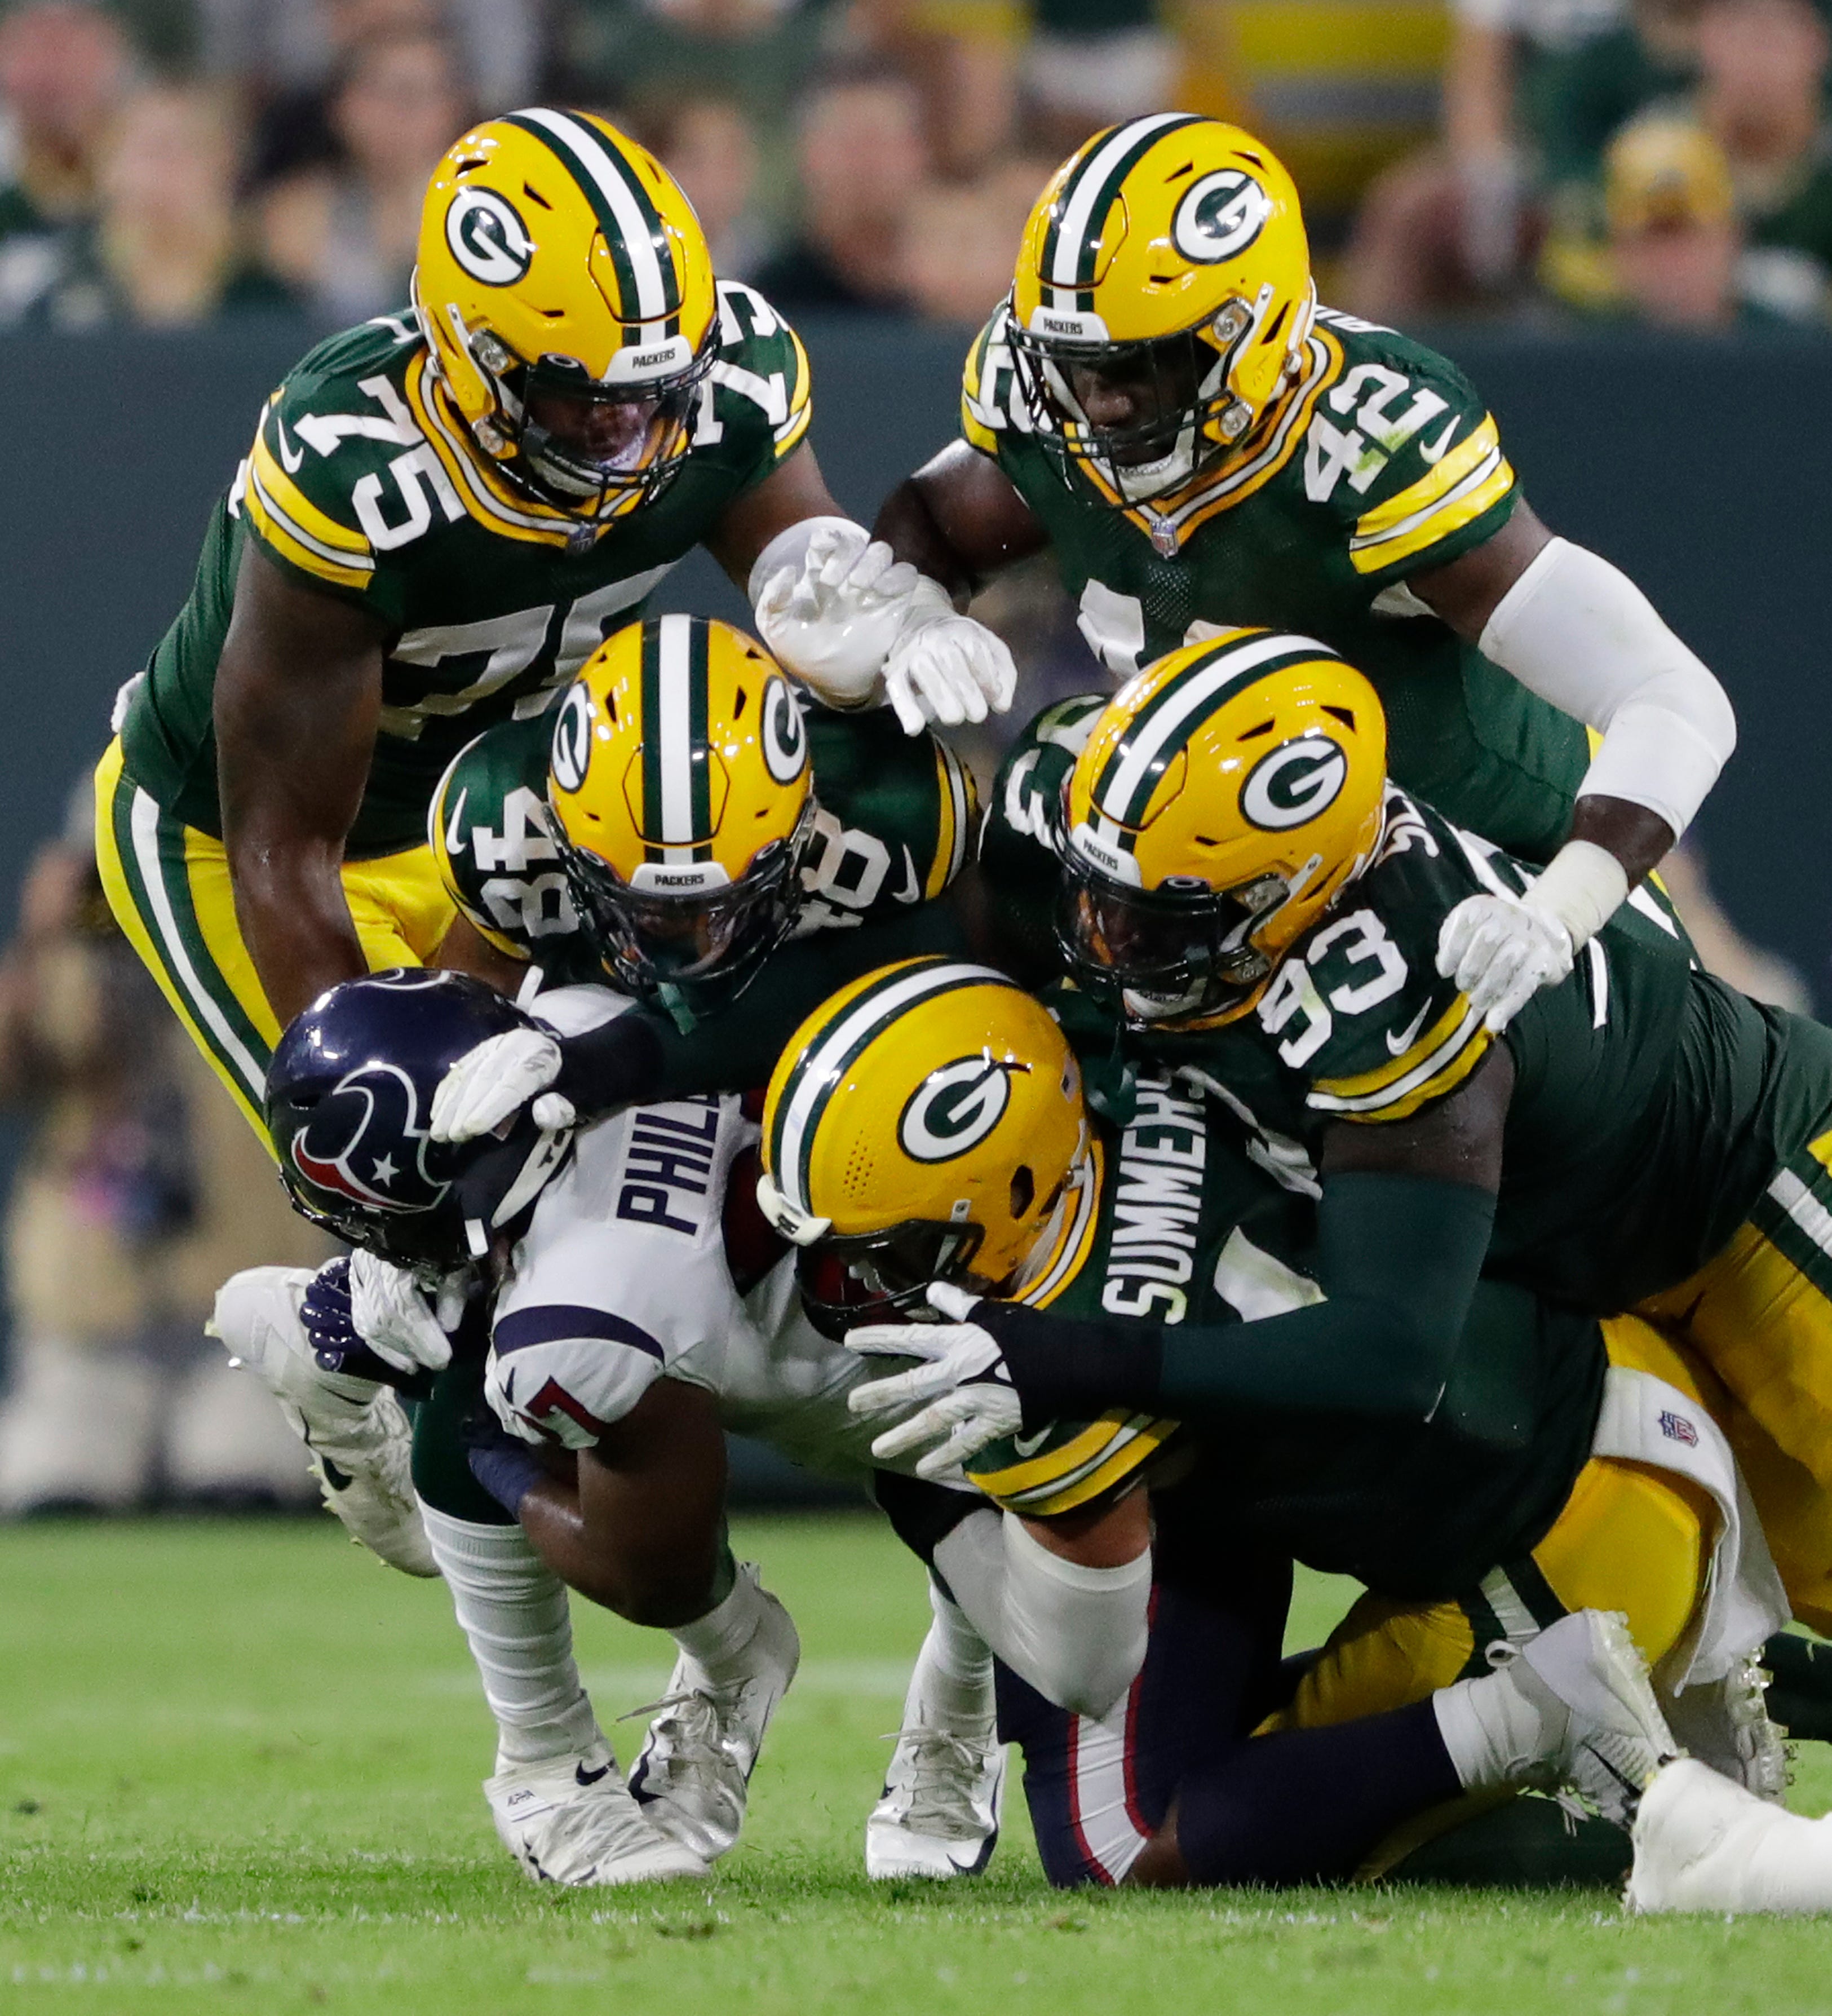 Houston Texans running back Scottie Phillips (27) is stopped by the Green Bay Packers defense during a preseason game on Saturday, Aug. 14, 2021, at Lambeau Field in Green Bay.